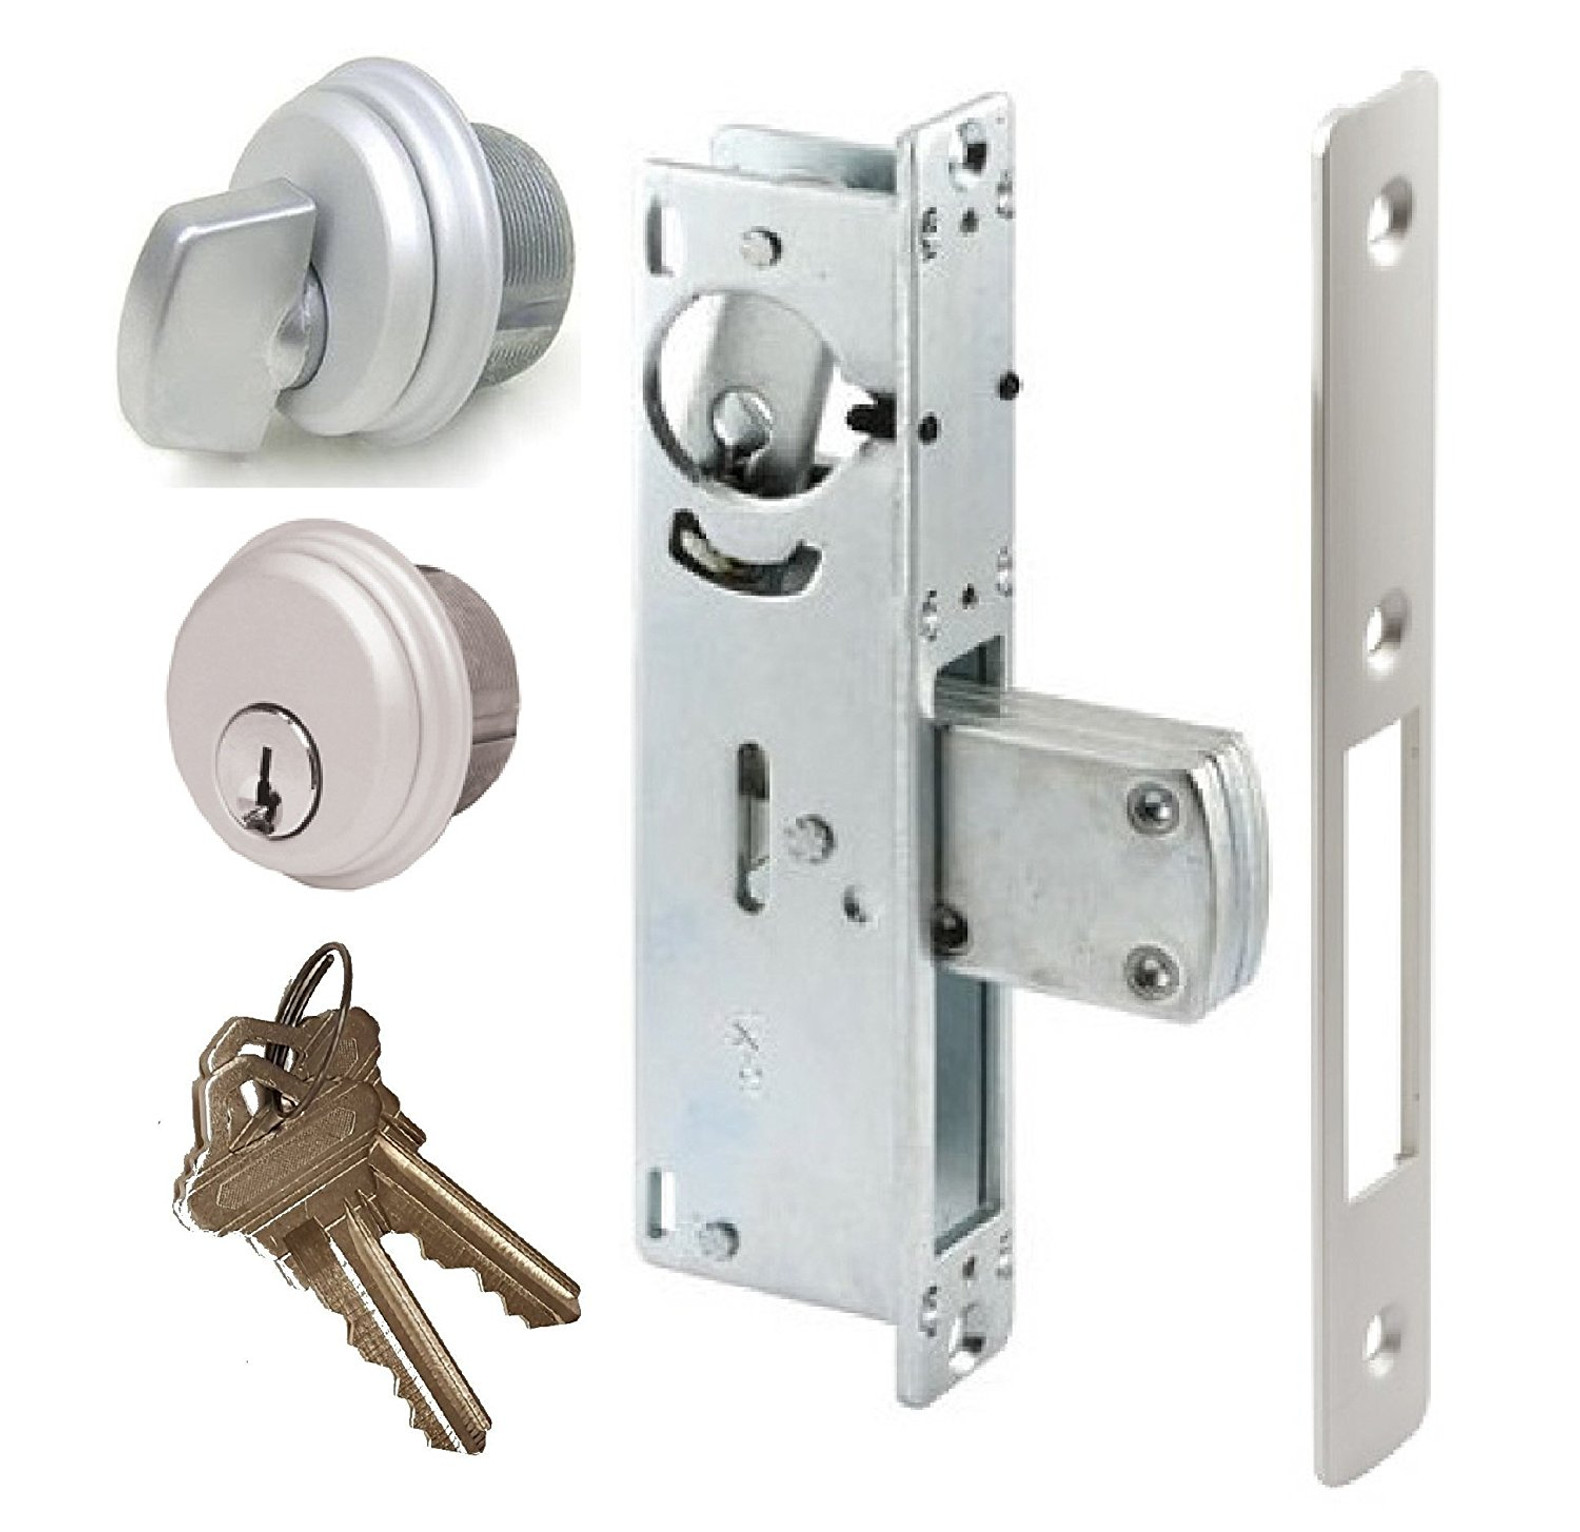 IFA Hardware Commercial Lock Cylinder and Thumbturn Storefront Mortise Door Lock 